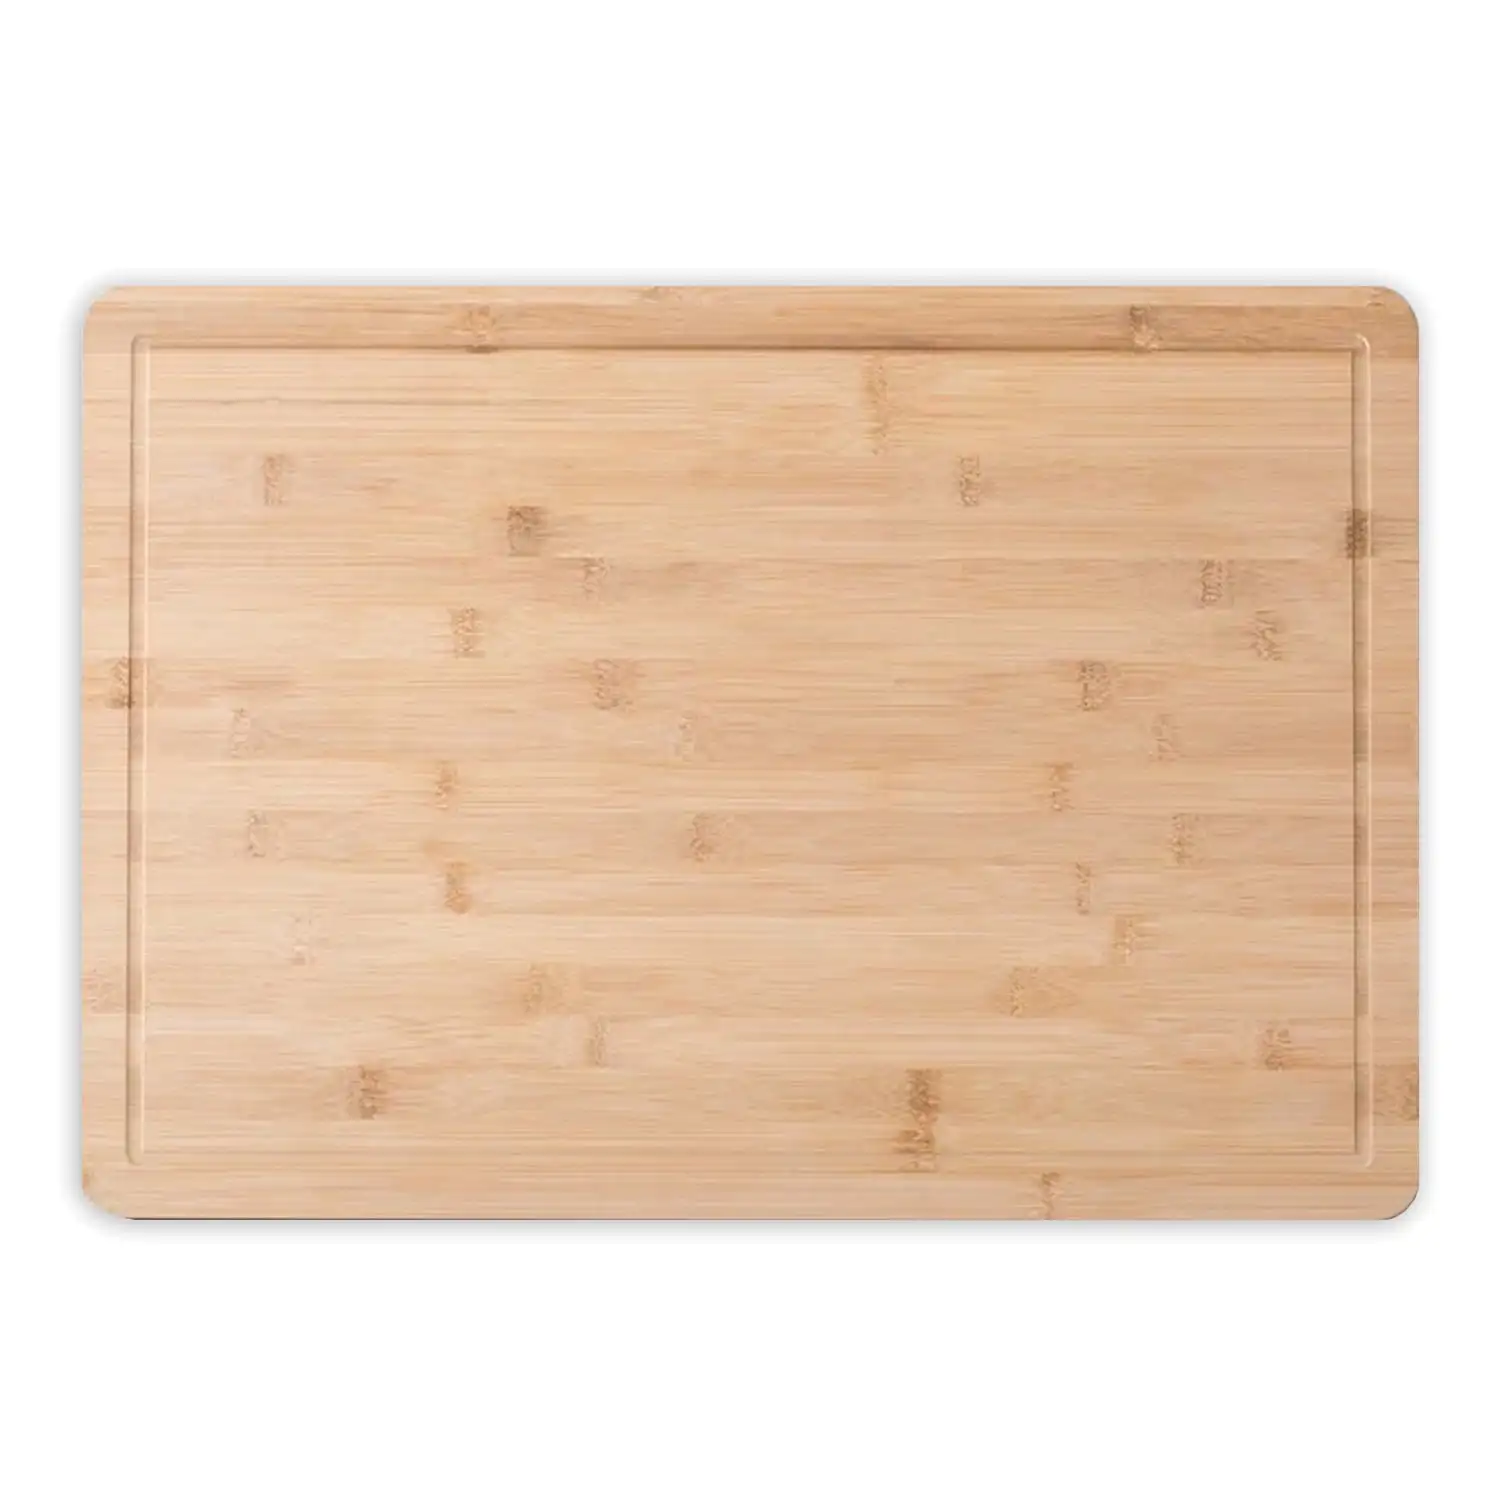 

Better Houseware Bamboo Cutting Board with Well, 339/14